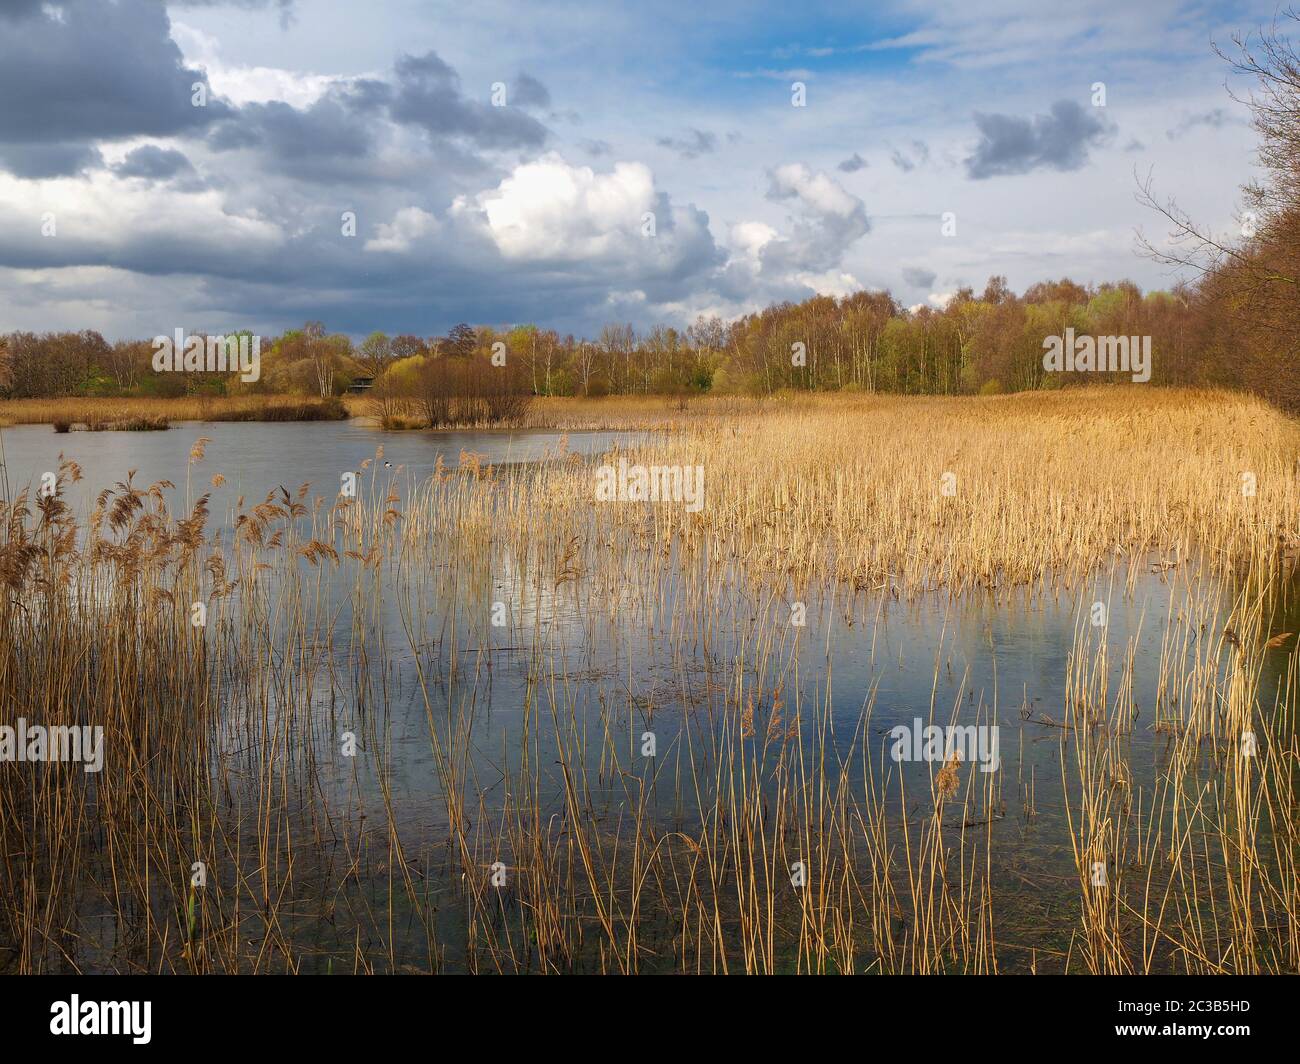 View over the reeds and wetlands at Potteric Carr Nature Reserve near Doncaster, South Yorkshire, England Stock Photo